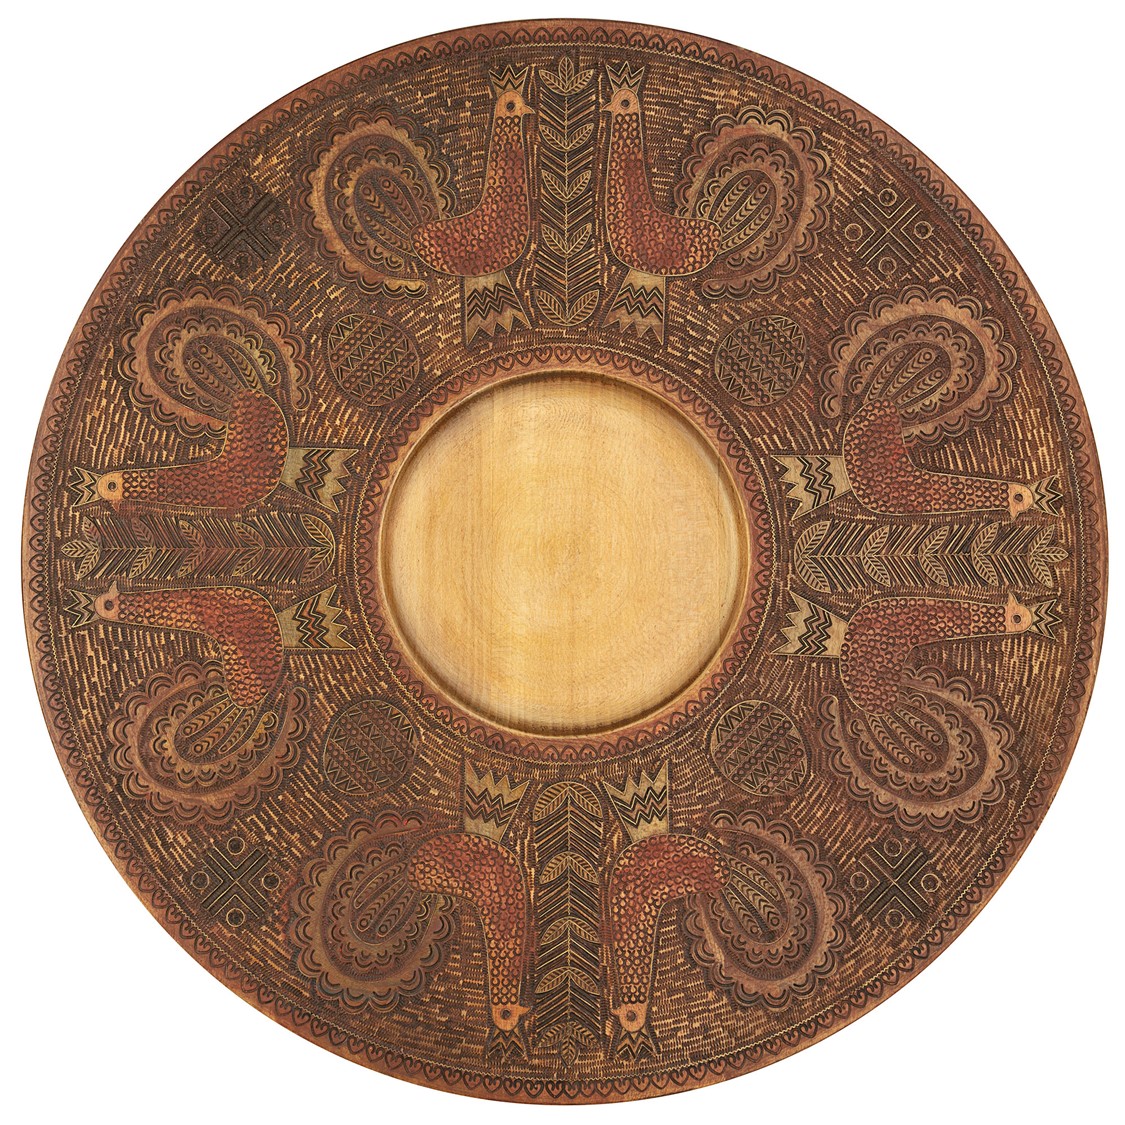 image of an ornamental plate in wood, with metal inlay